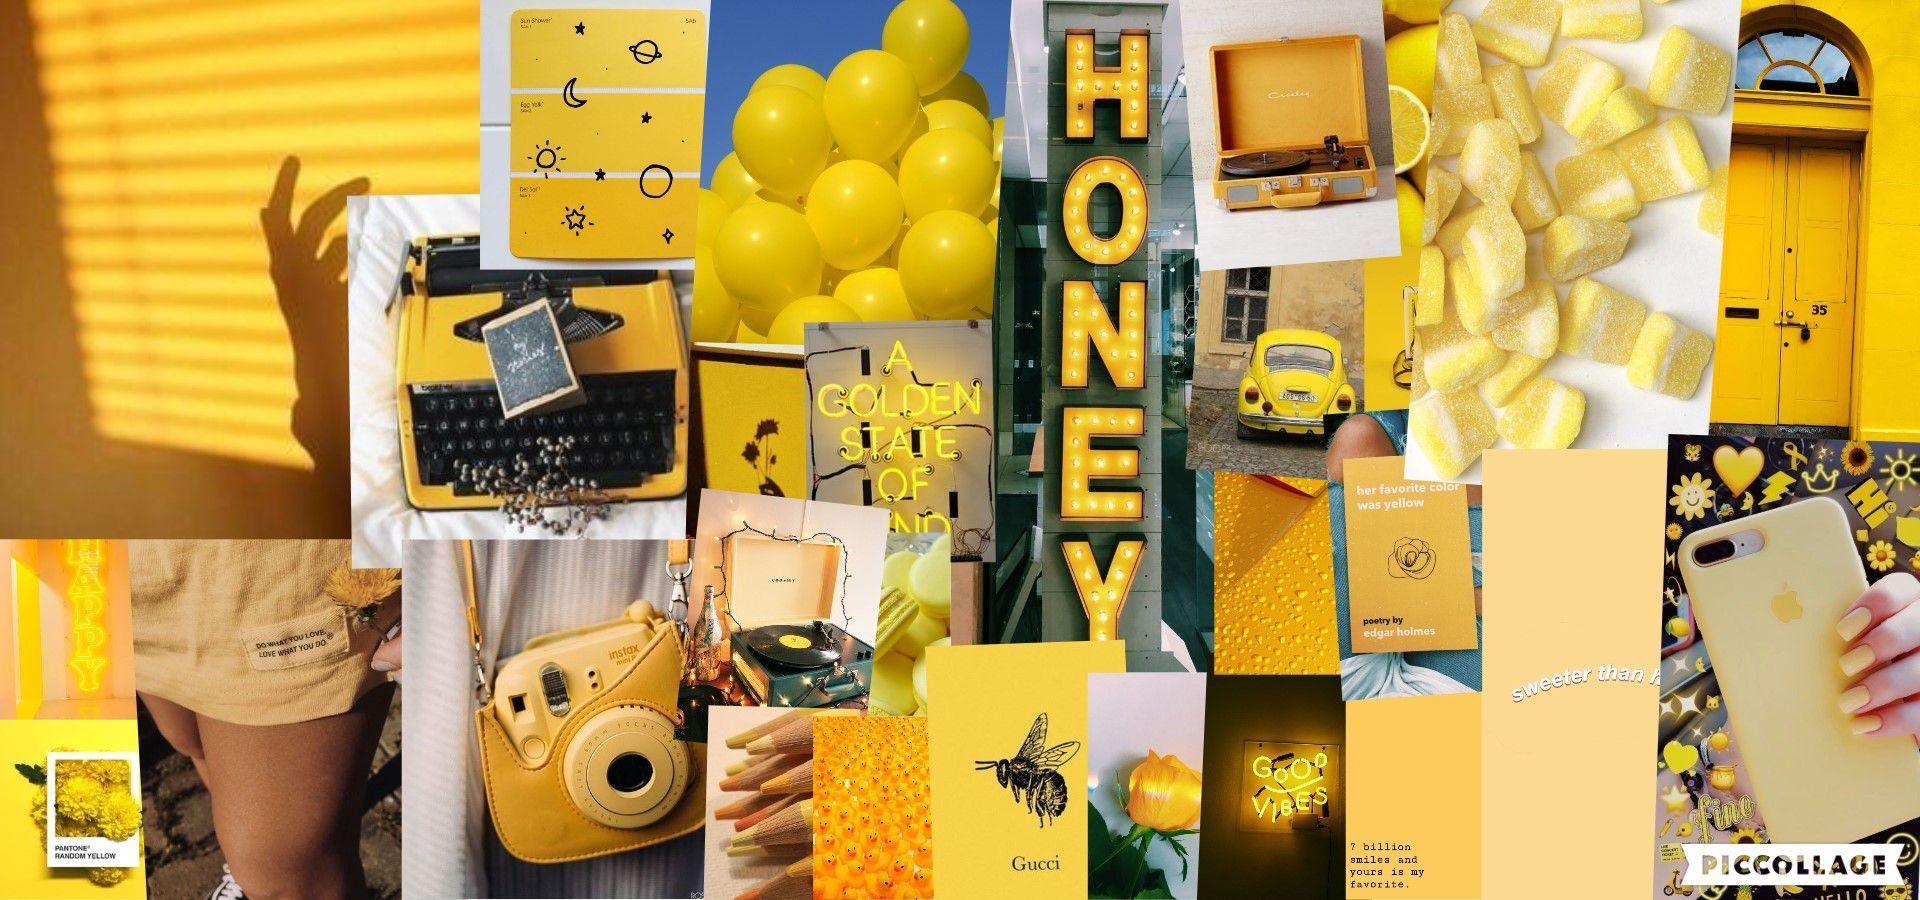 A collage of different yellow aesthetic pictures including honeycombs, balloons, and a typewriter. - Yellow, honey, laptop